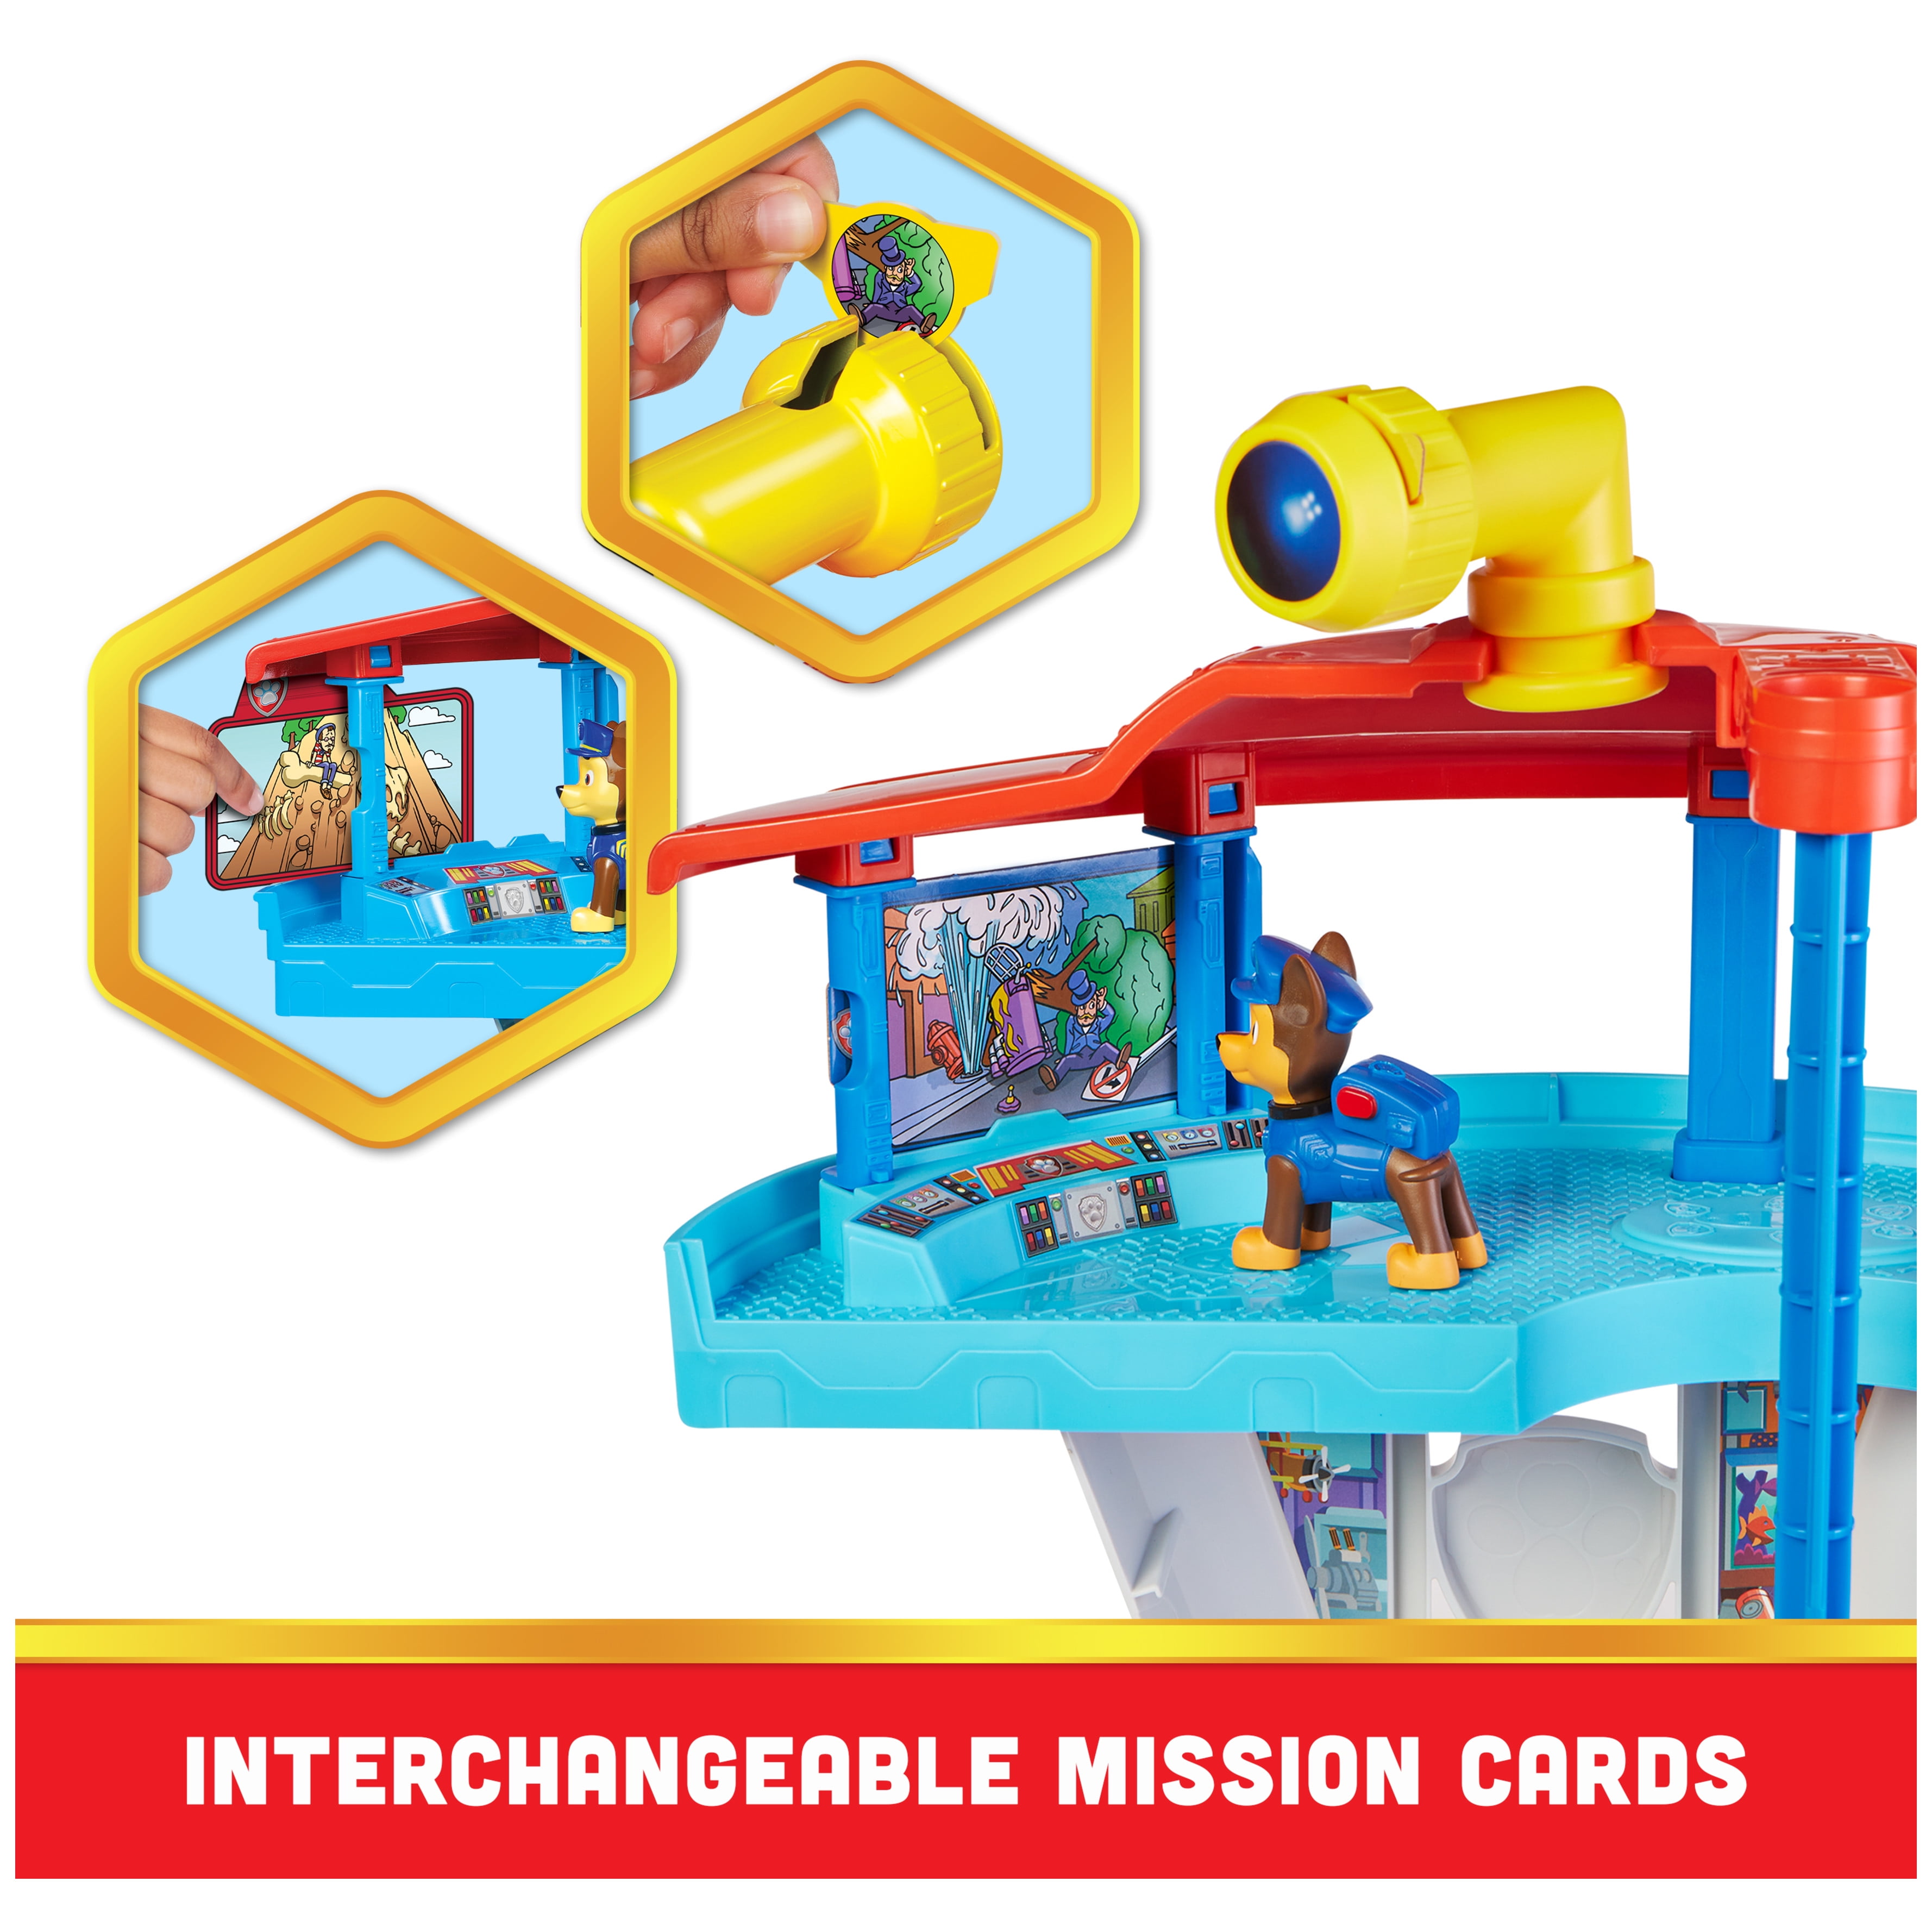 PAW Patrol Lookout Tower Playset with 2 Chase Action Figures and Police Cruiser - 3